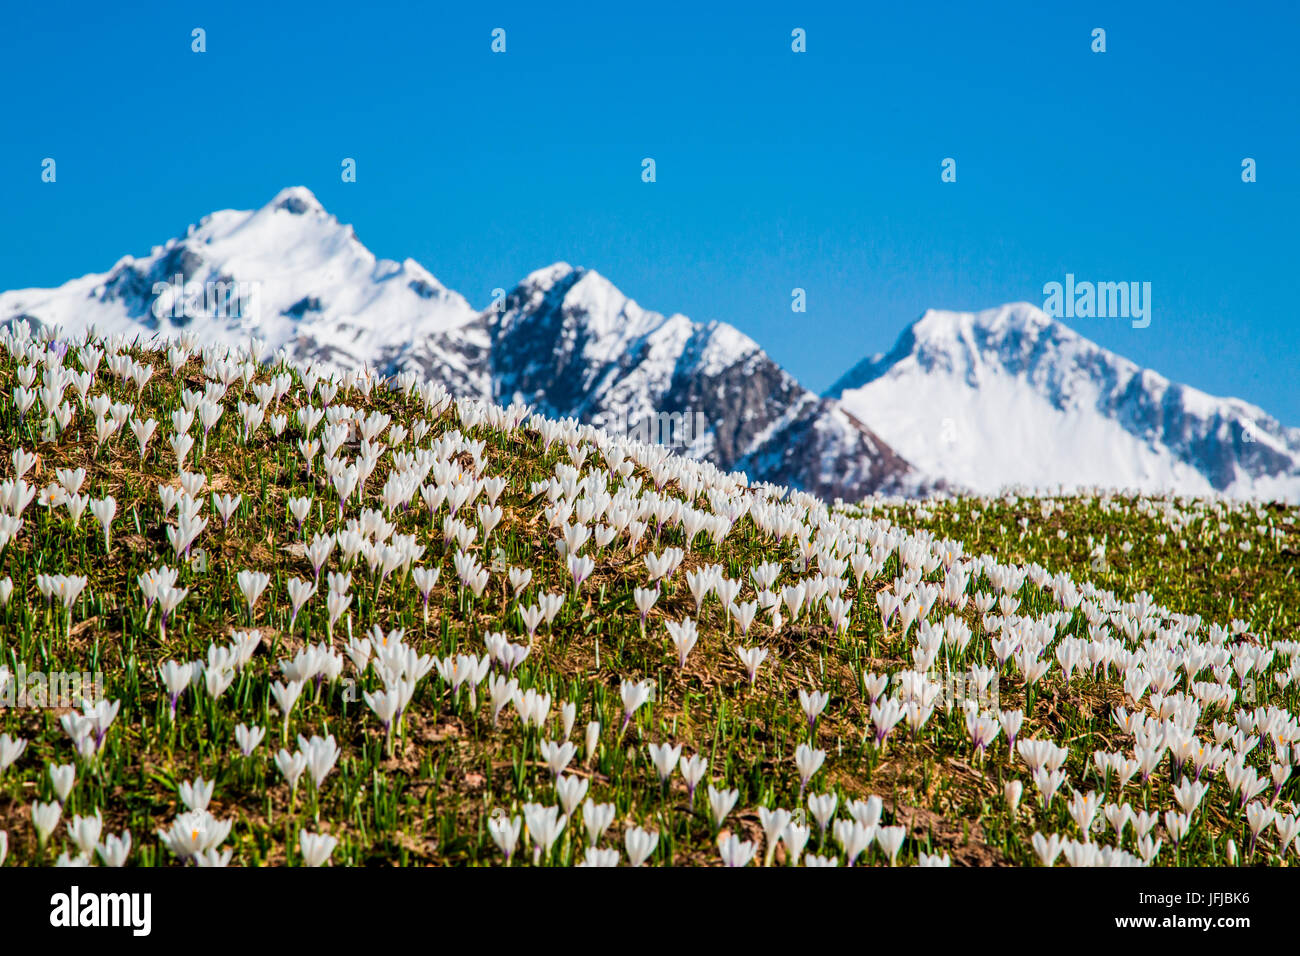 The green fields and flowers contrasts with the snowy peaks of the Bitto Valley, Orobie Alps, Valtellina, Lombardy, Italy, Europe Stock Photo